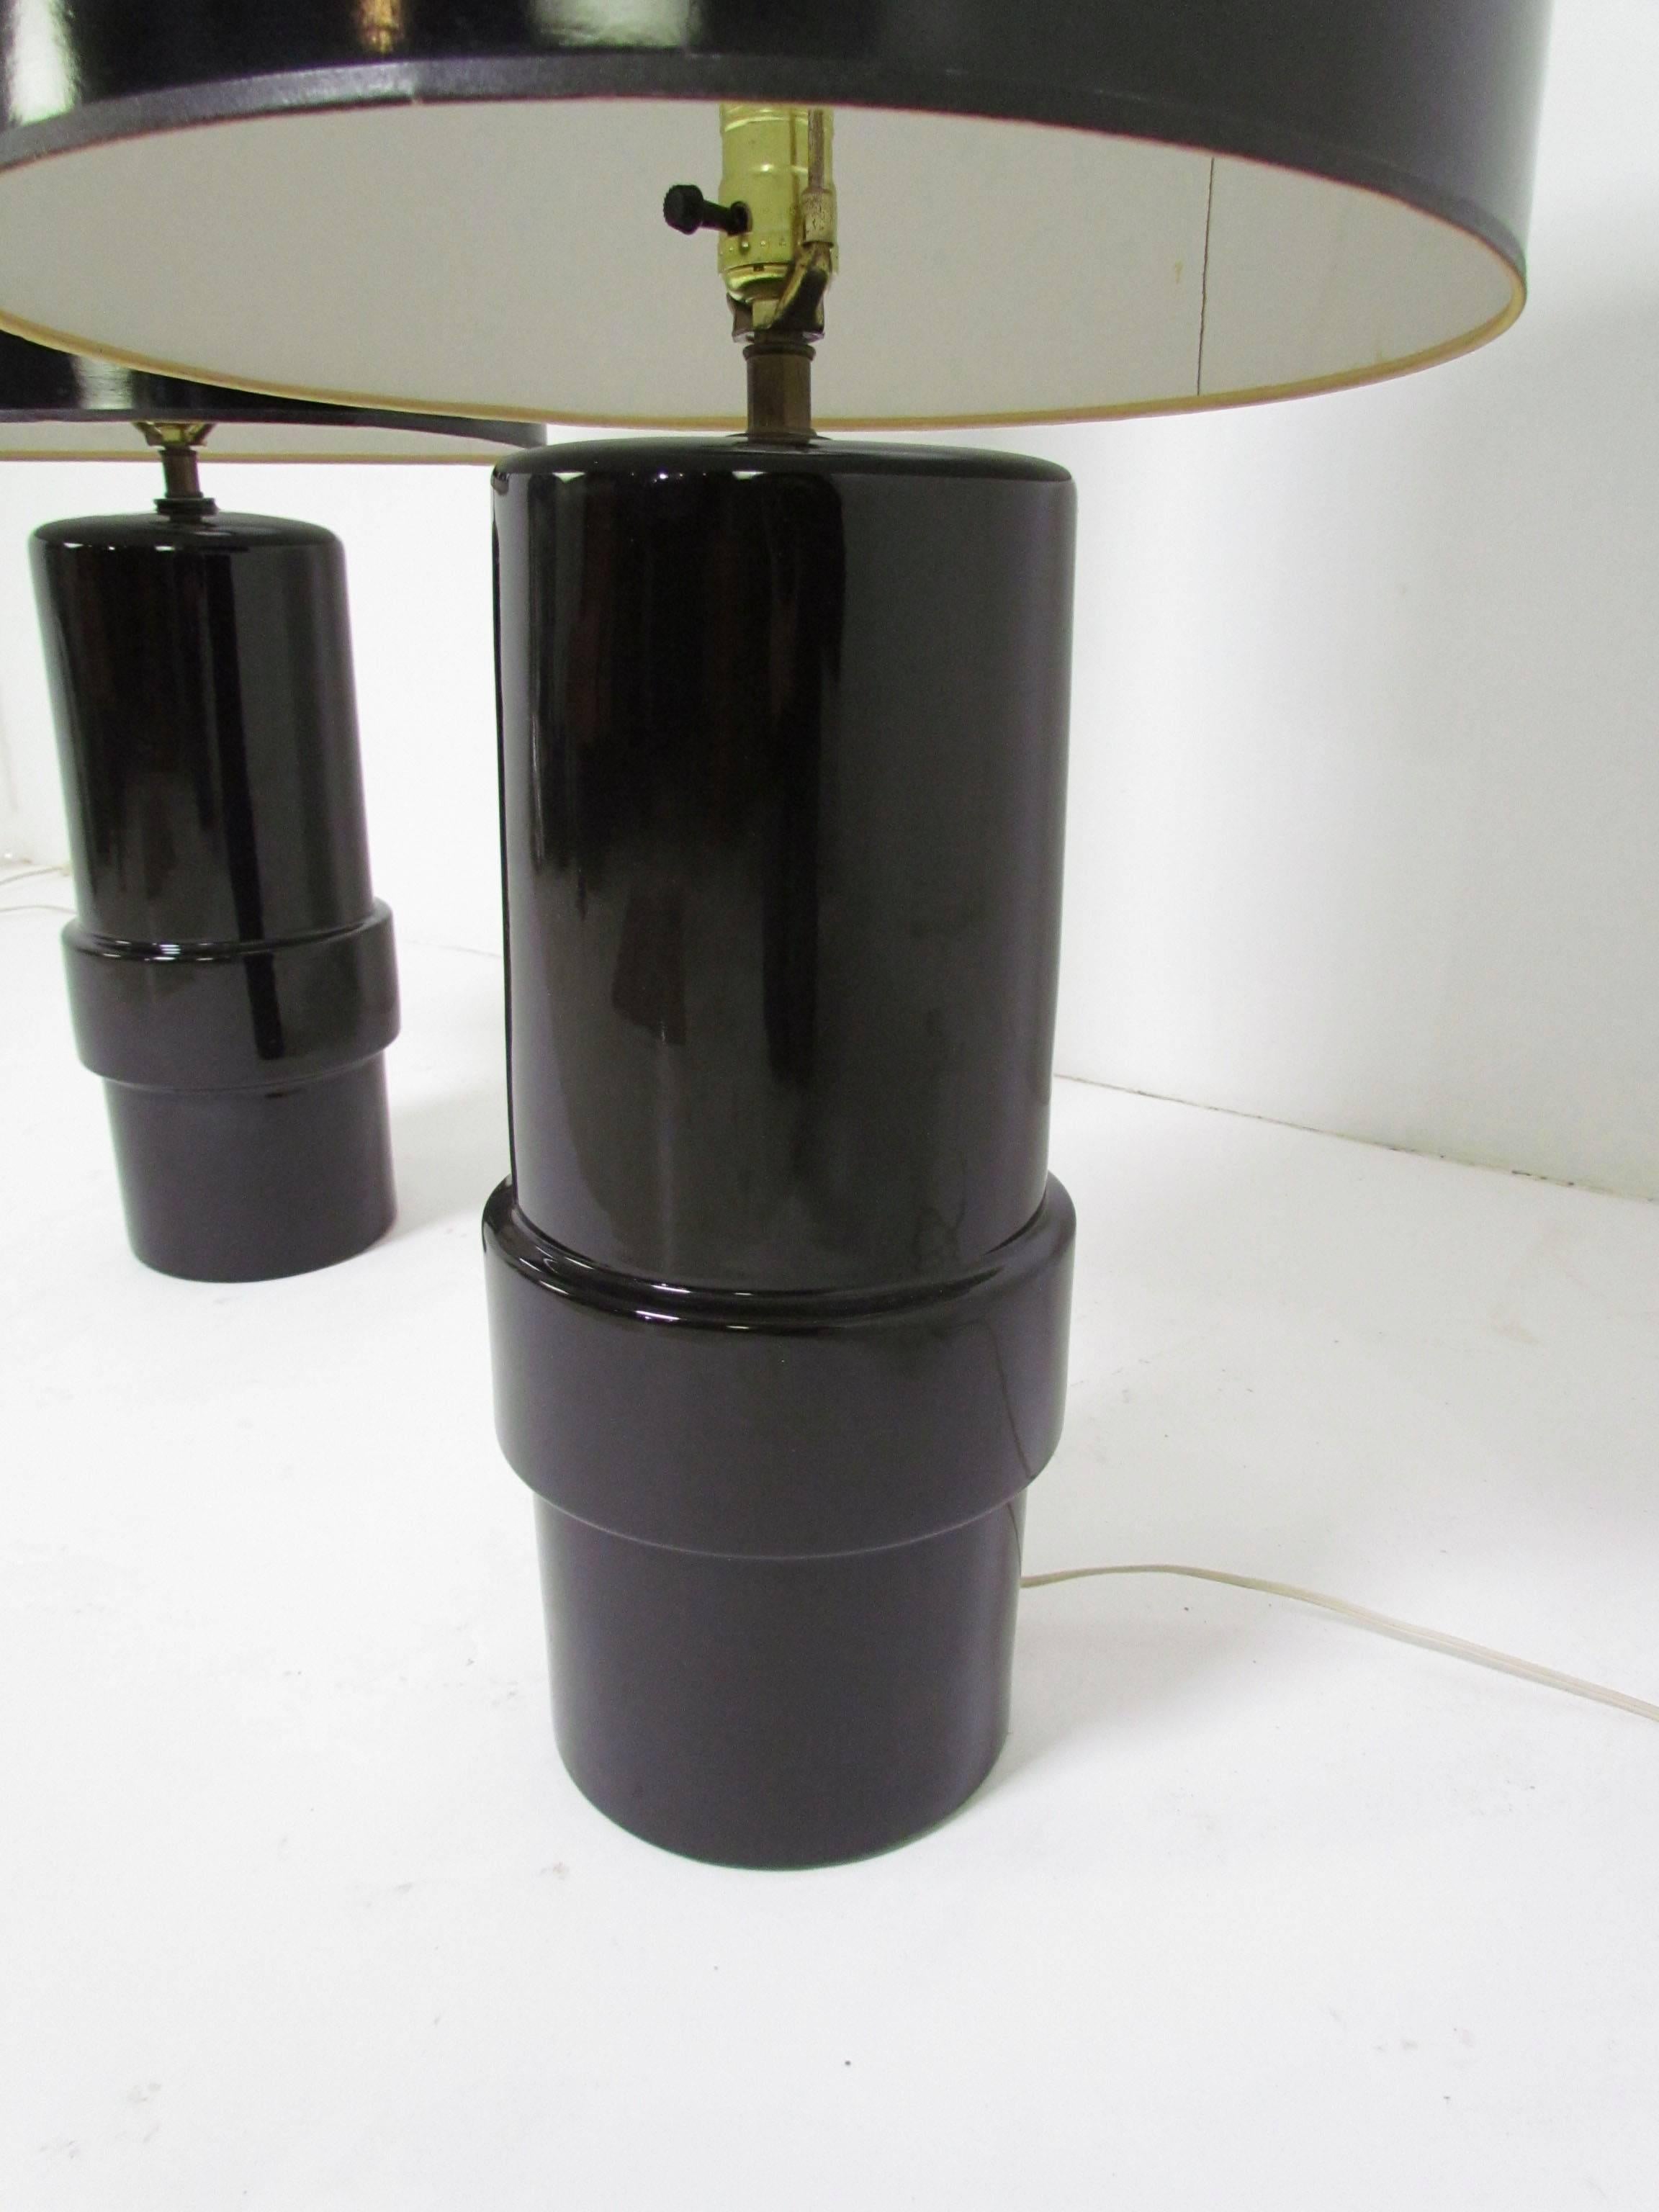 Pair of large cylindrical black ceramic lamps with original shades, circa 1970s. Overall height with shades is 37.25